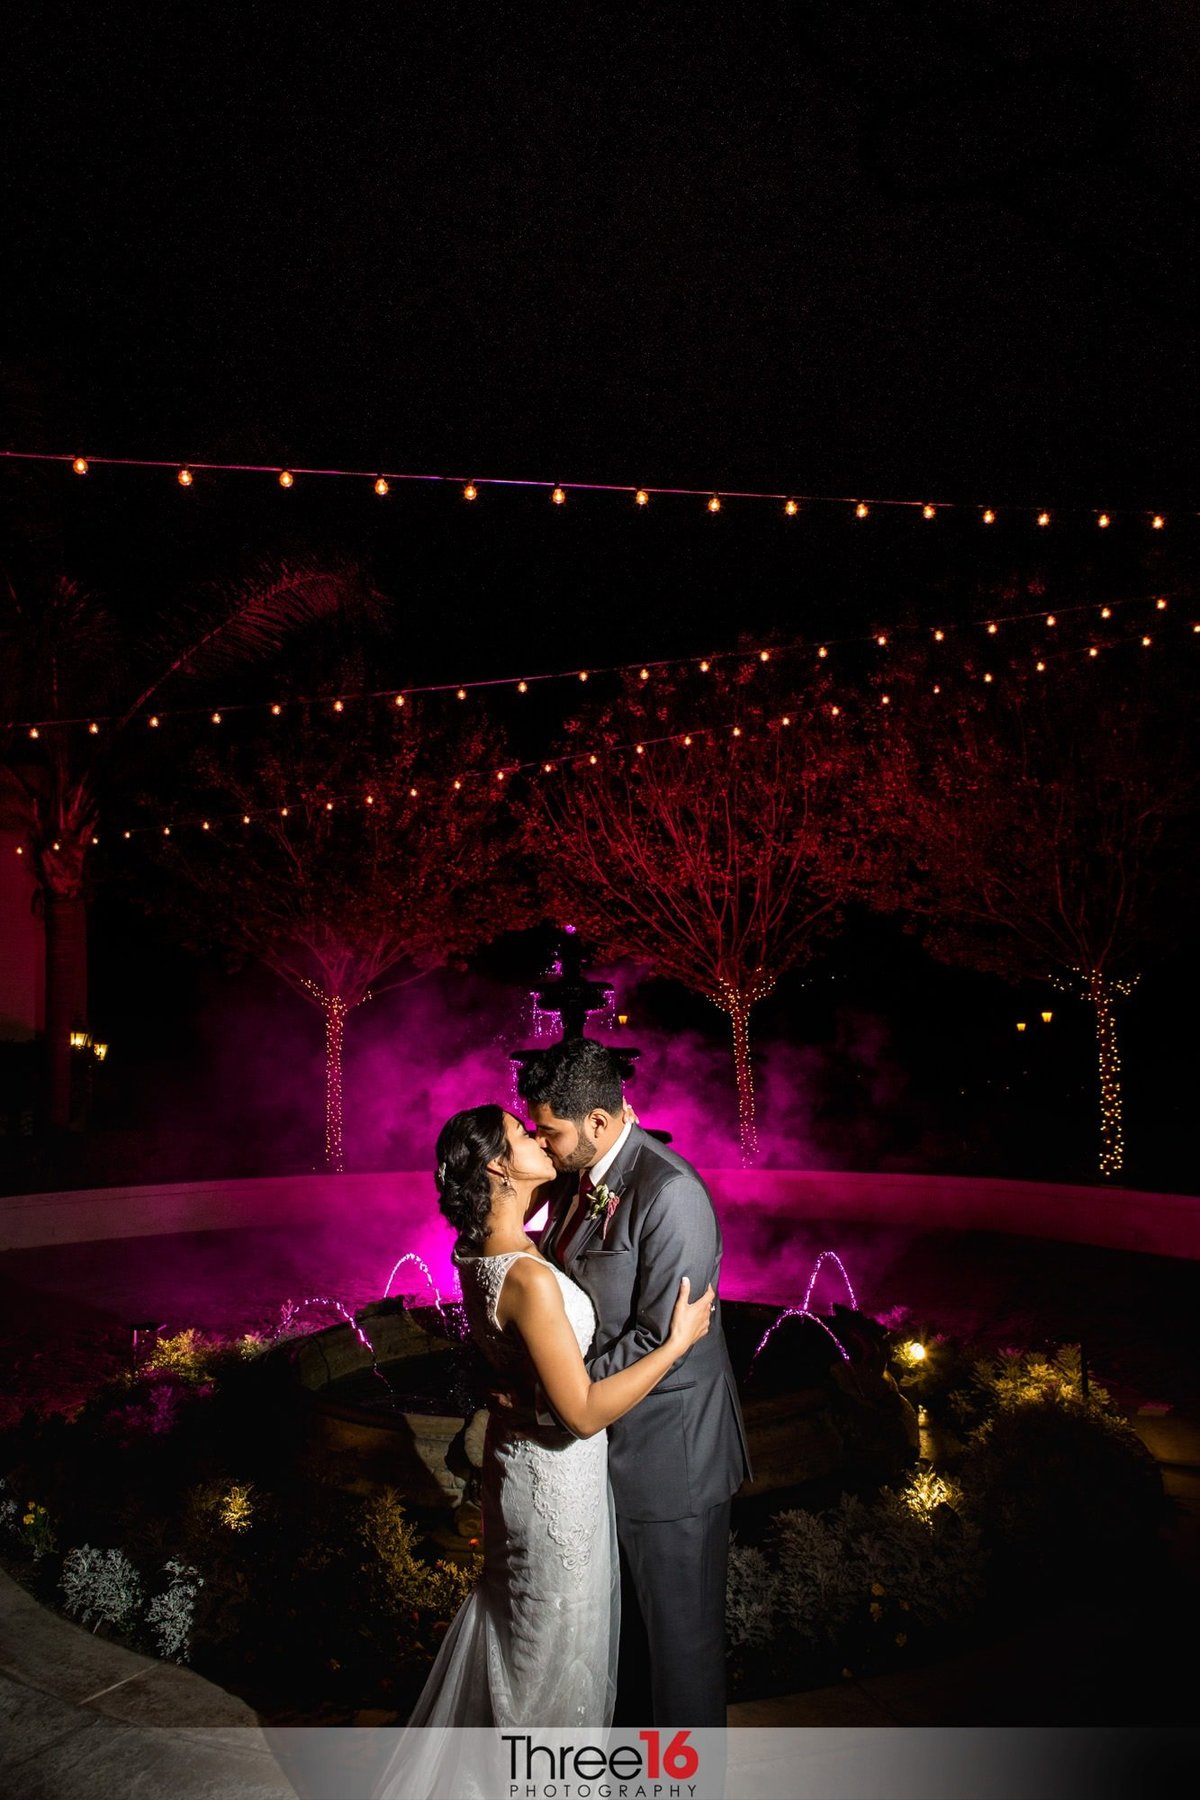 Bride and Groom share a kiss late into the evening with purple haze background